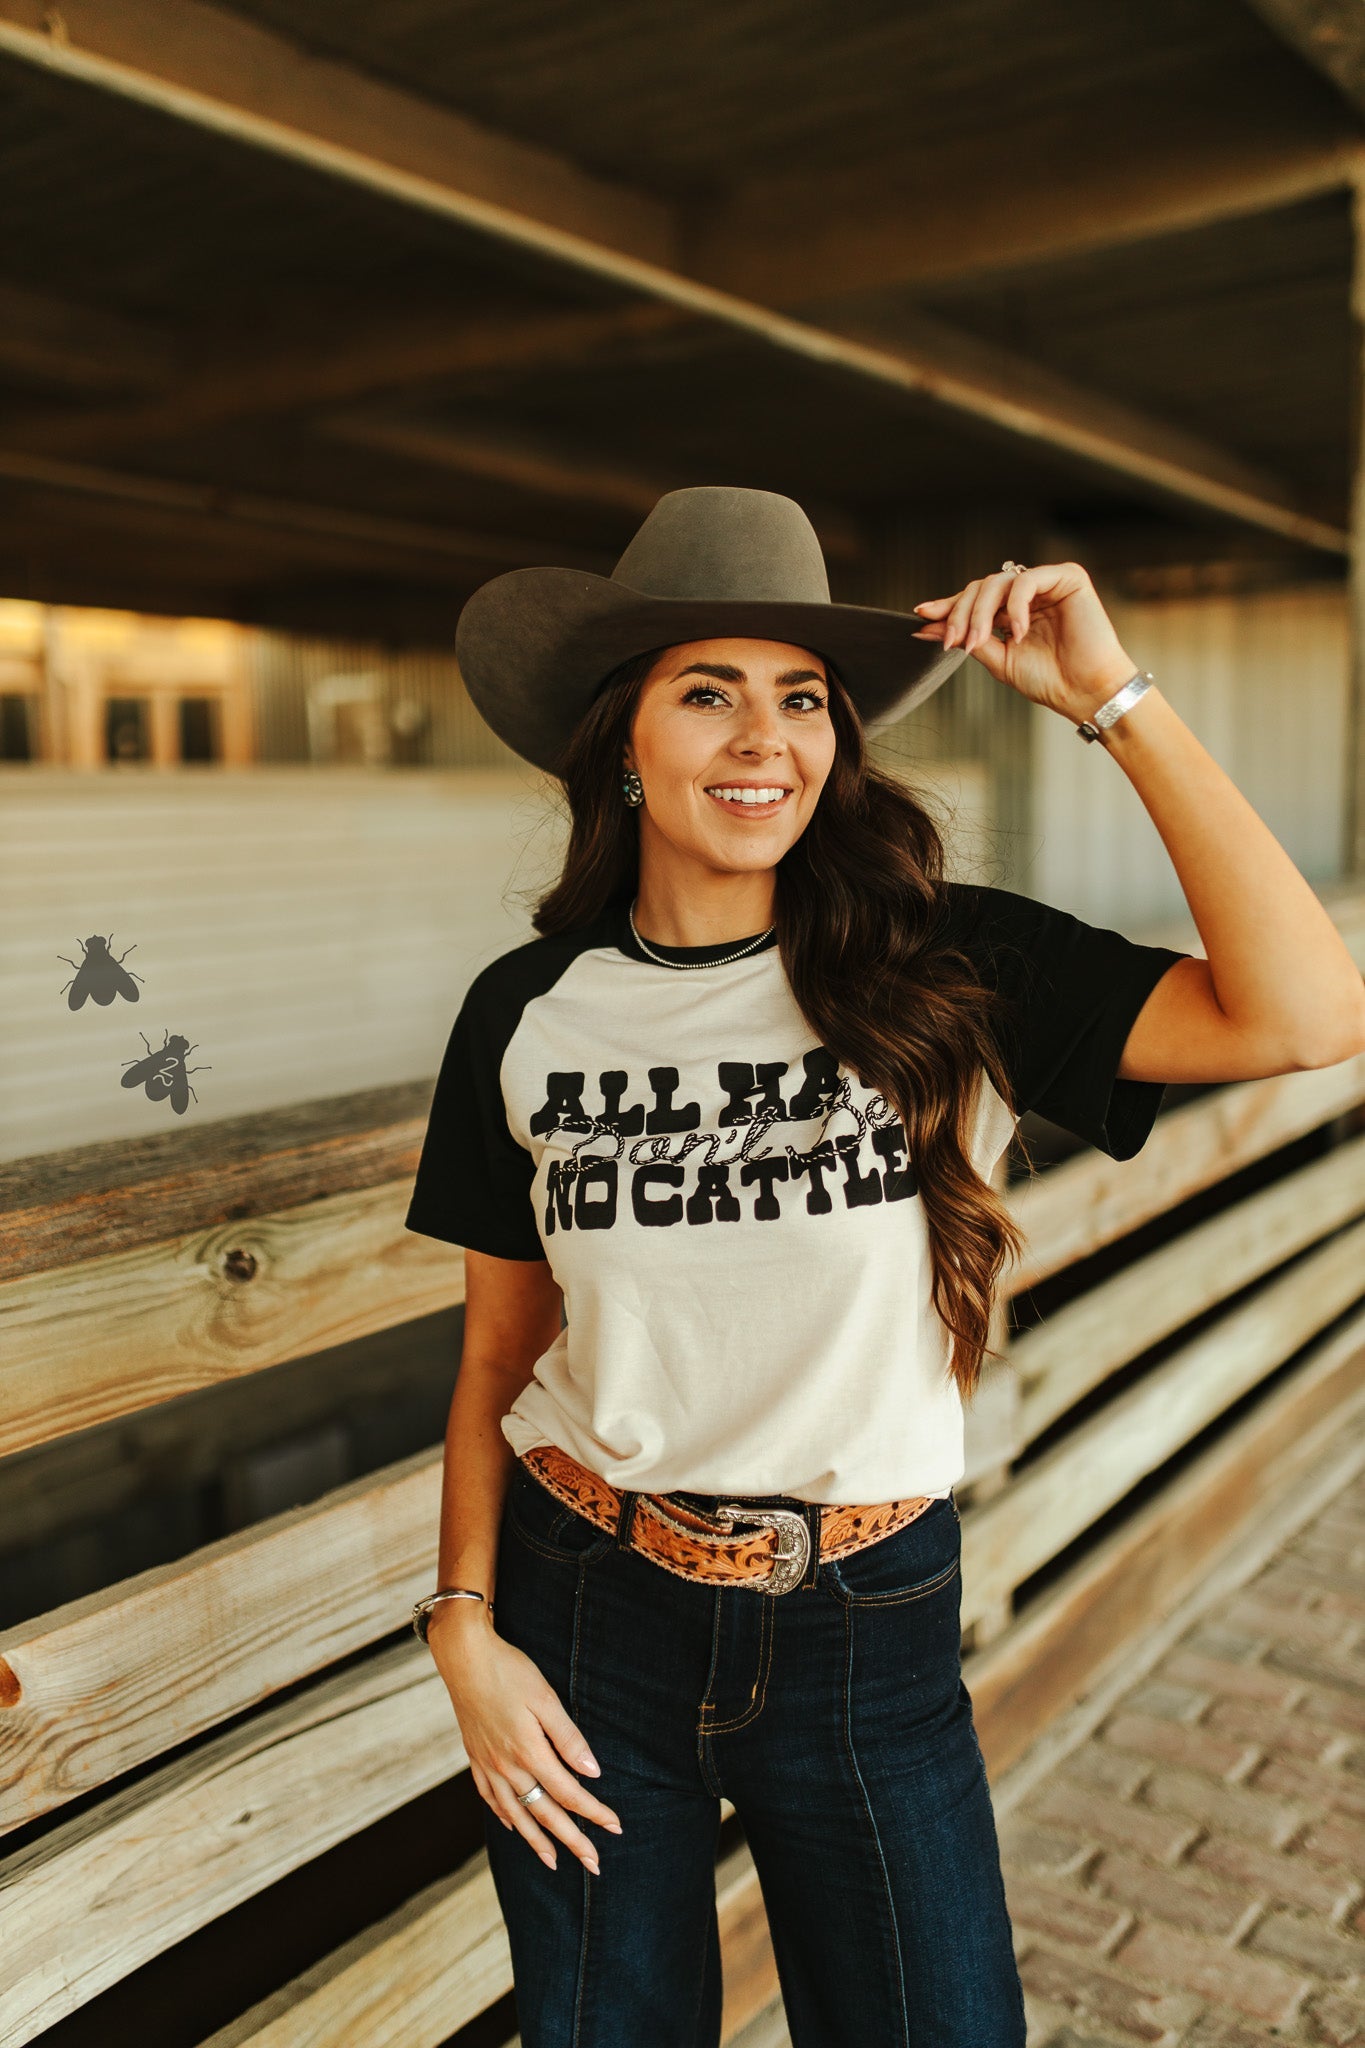 the All Hat |Cowboy| tee